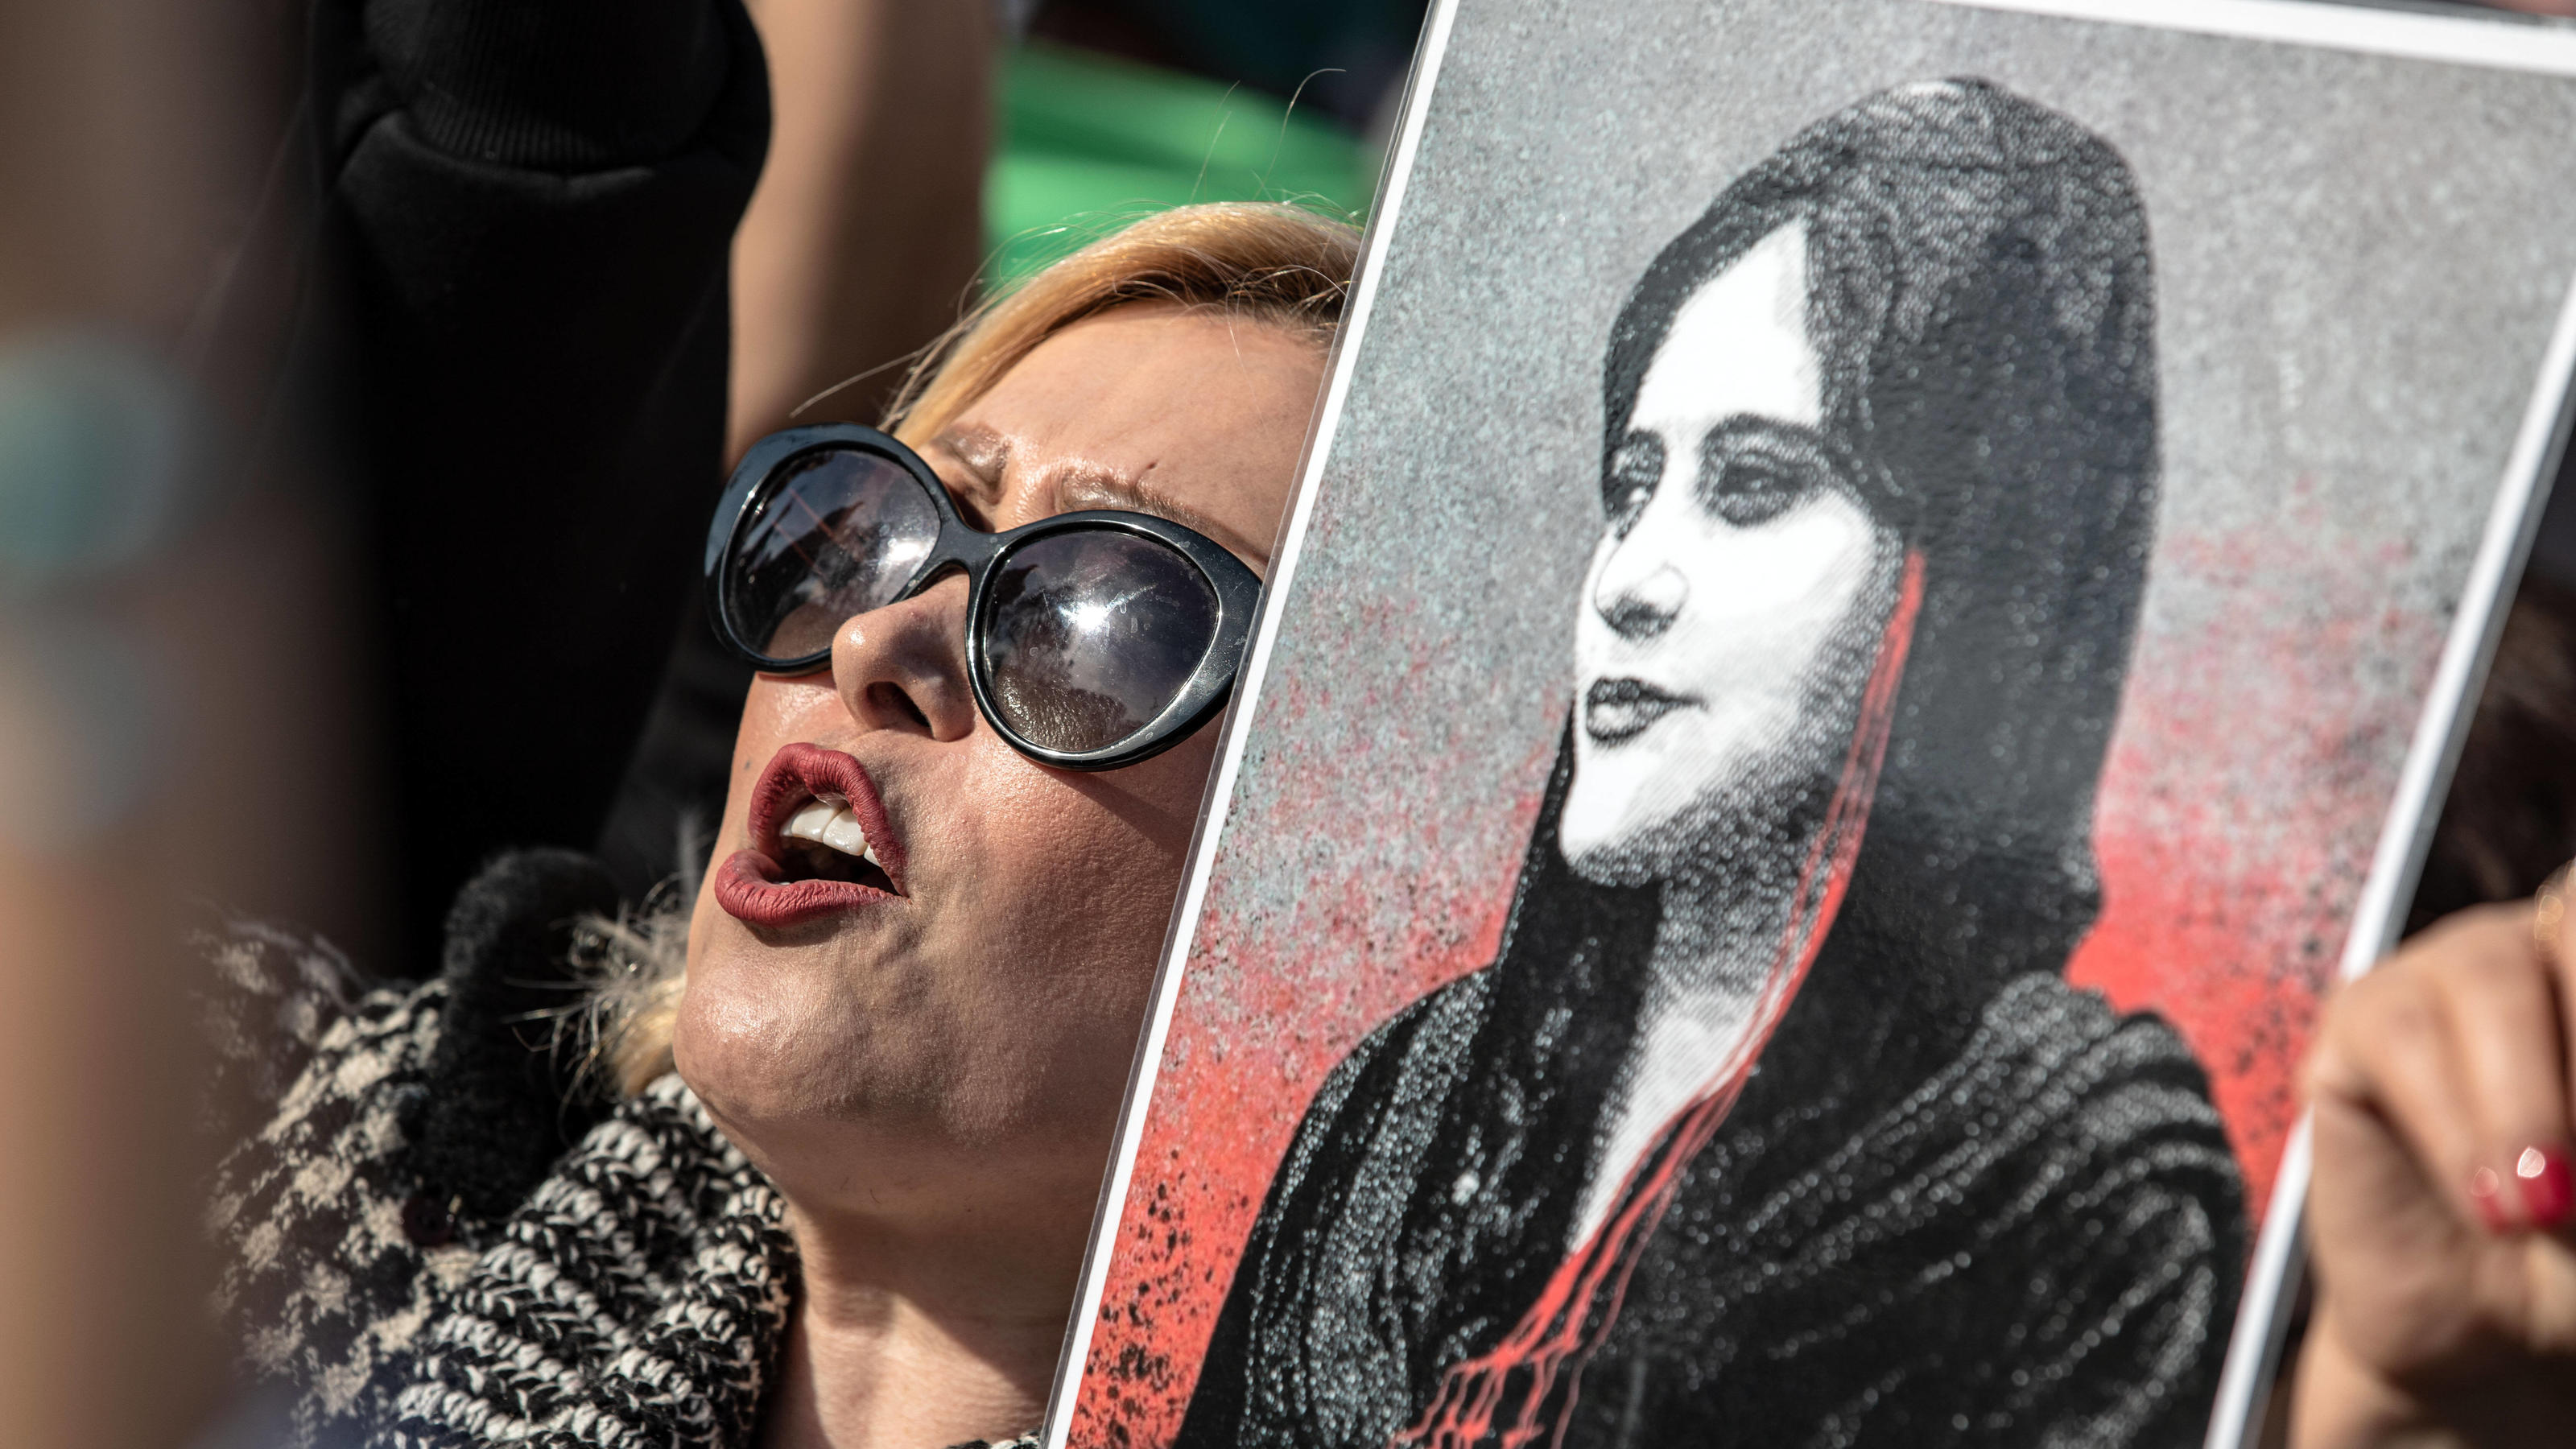  December 17, 2022, Istanbul, Turkey: A female protester takes part during the demonstration. Mahsa Amini s death has sparked weeks of violent protests across Iran and other countries. Mahsa fell into a coma and died after being arrested in Tehran by